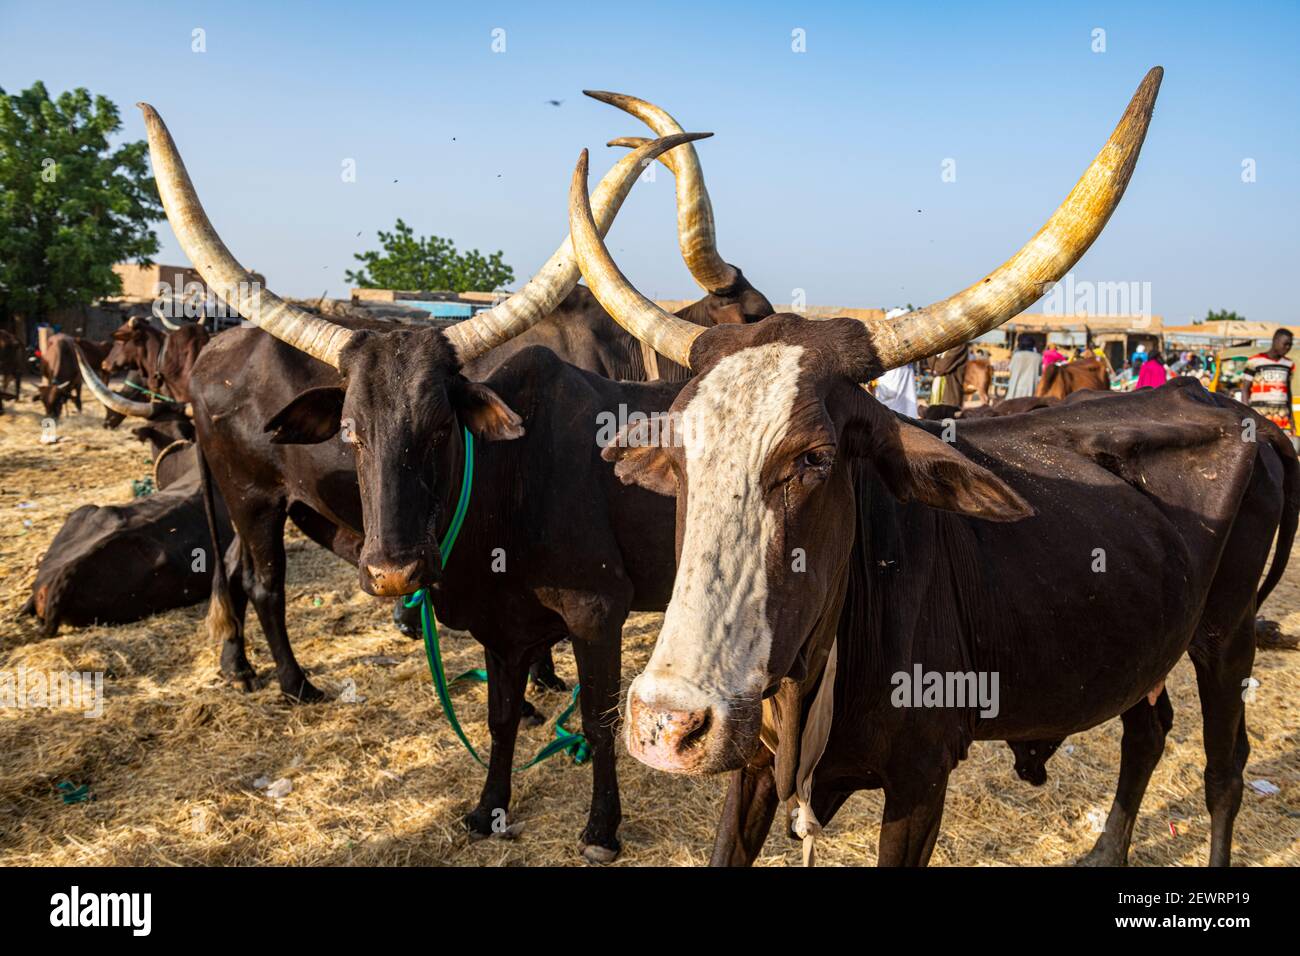 Cows with huge horns, Animal market, Agadez, Niger, Africa Stock Photo